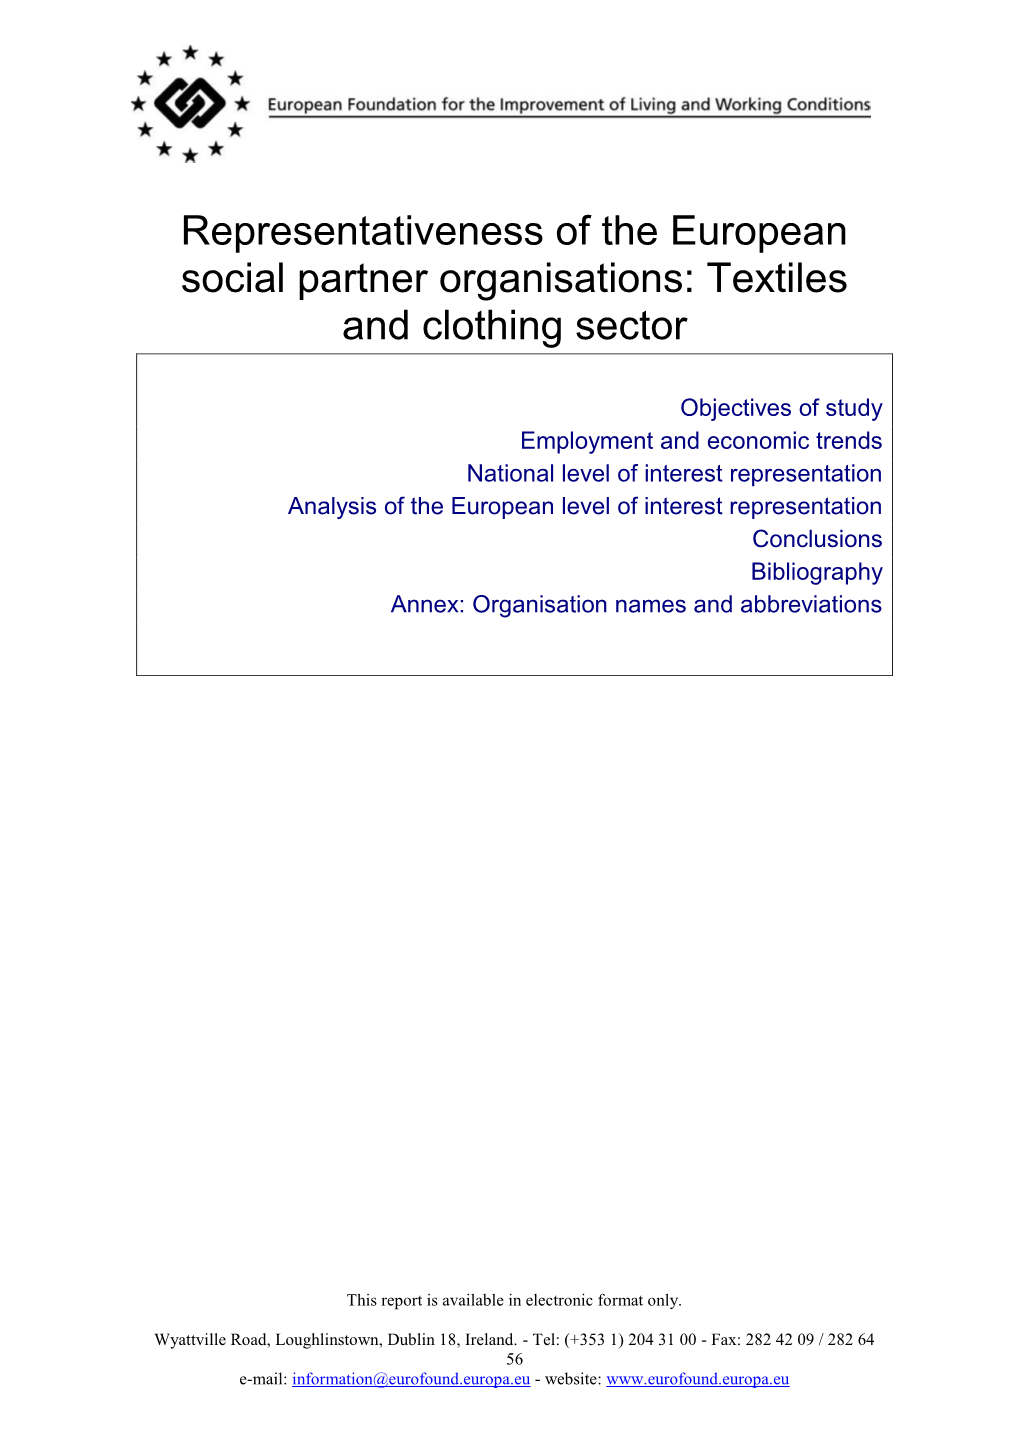 Textiles and Clothing Sector